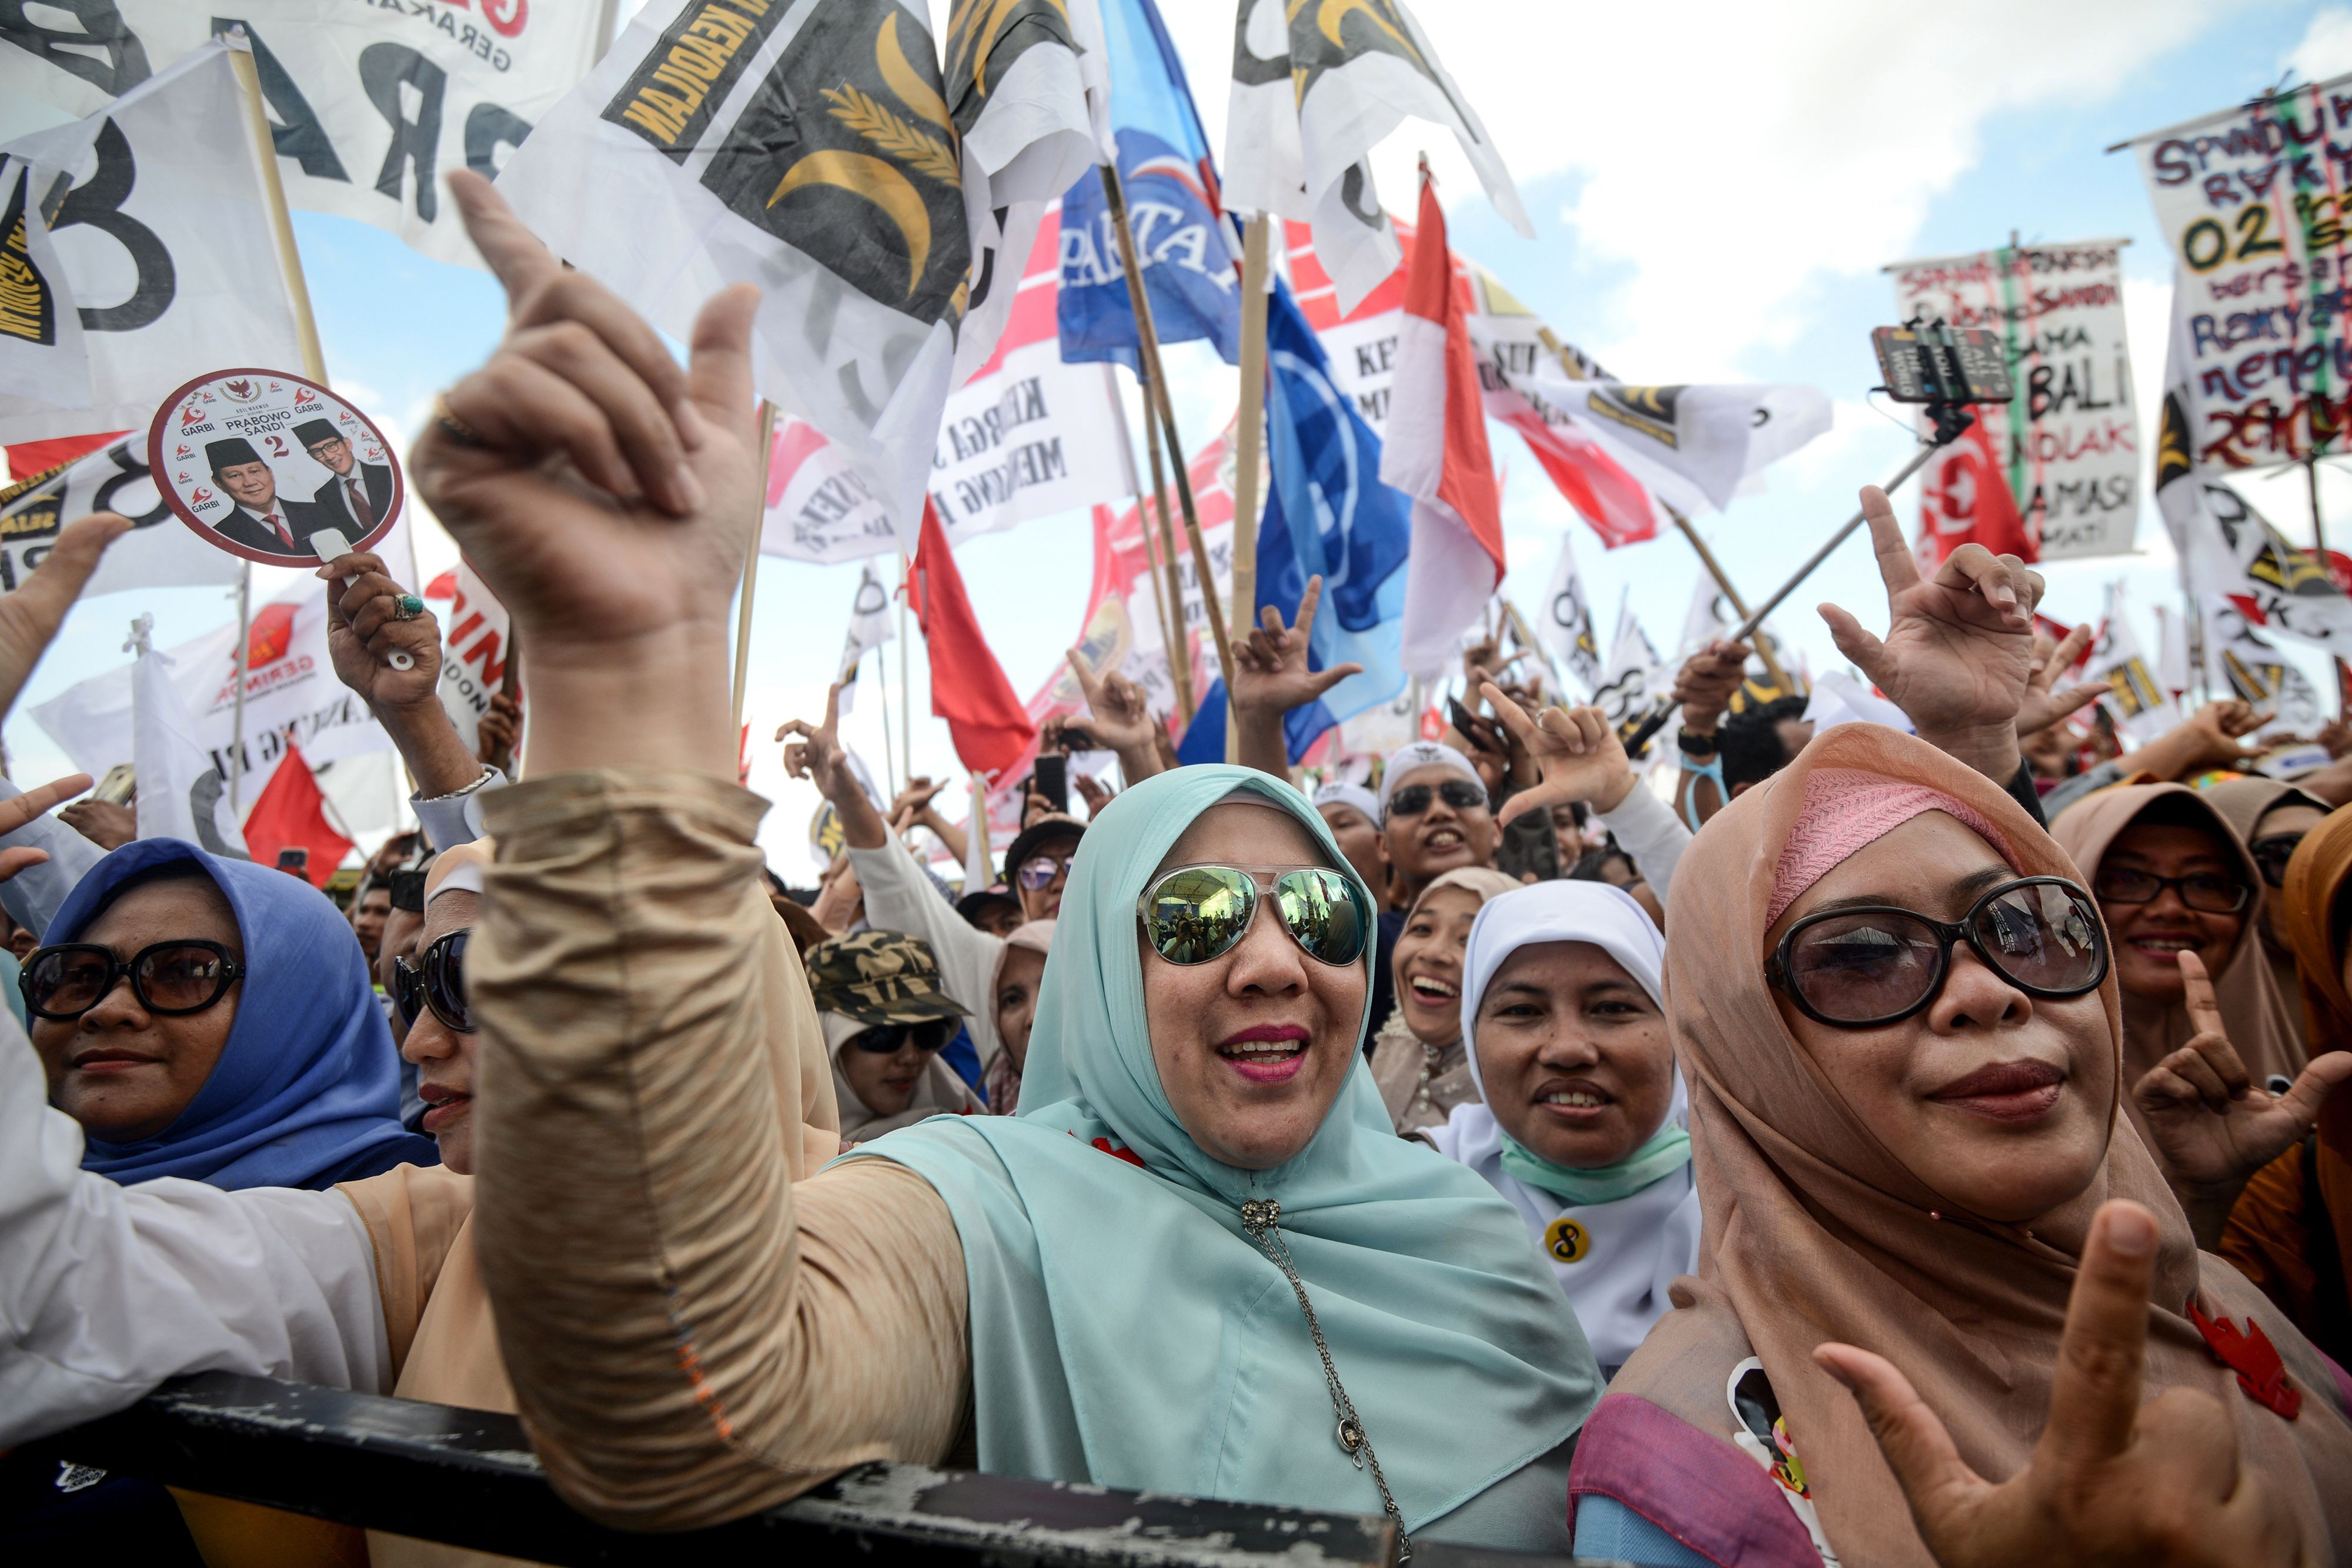 Supporters of Indonesian presidential candidate Prabowo Subianto at a campaign rally in Bali. Prabowo, who lost to current president Joko Widodo in the 2014 election, was a top military figure in the chaotic months before dictator Suharto was toppled by student protests in 1998. Photo: AFP